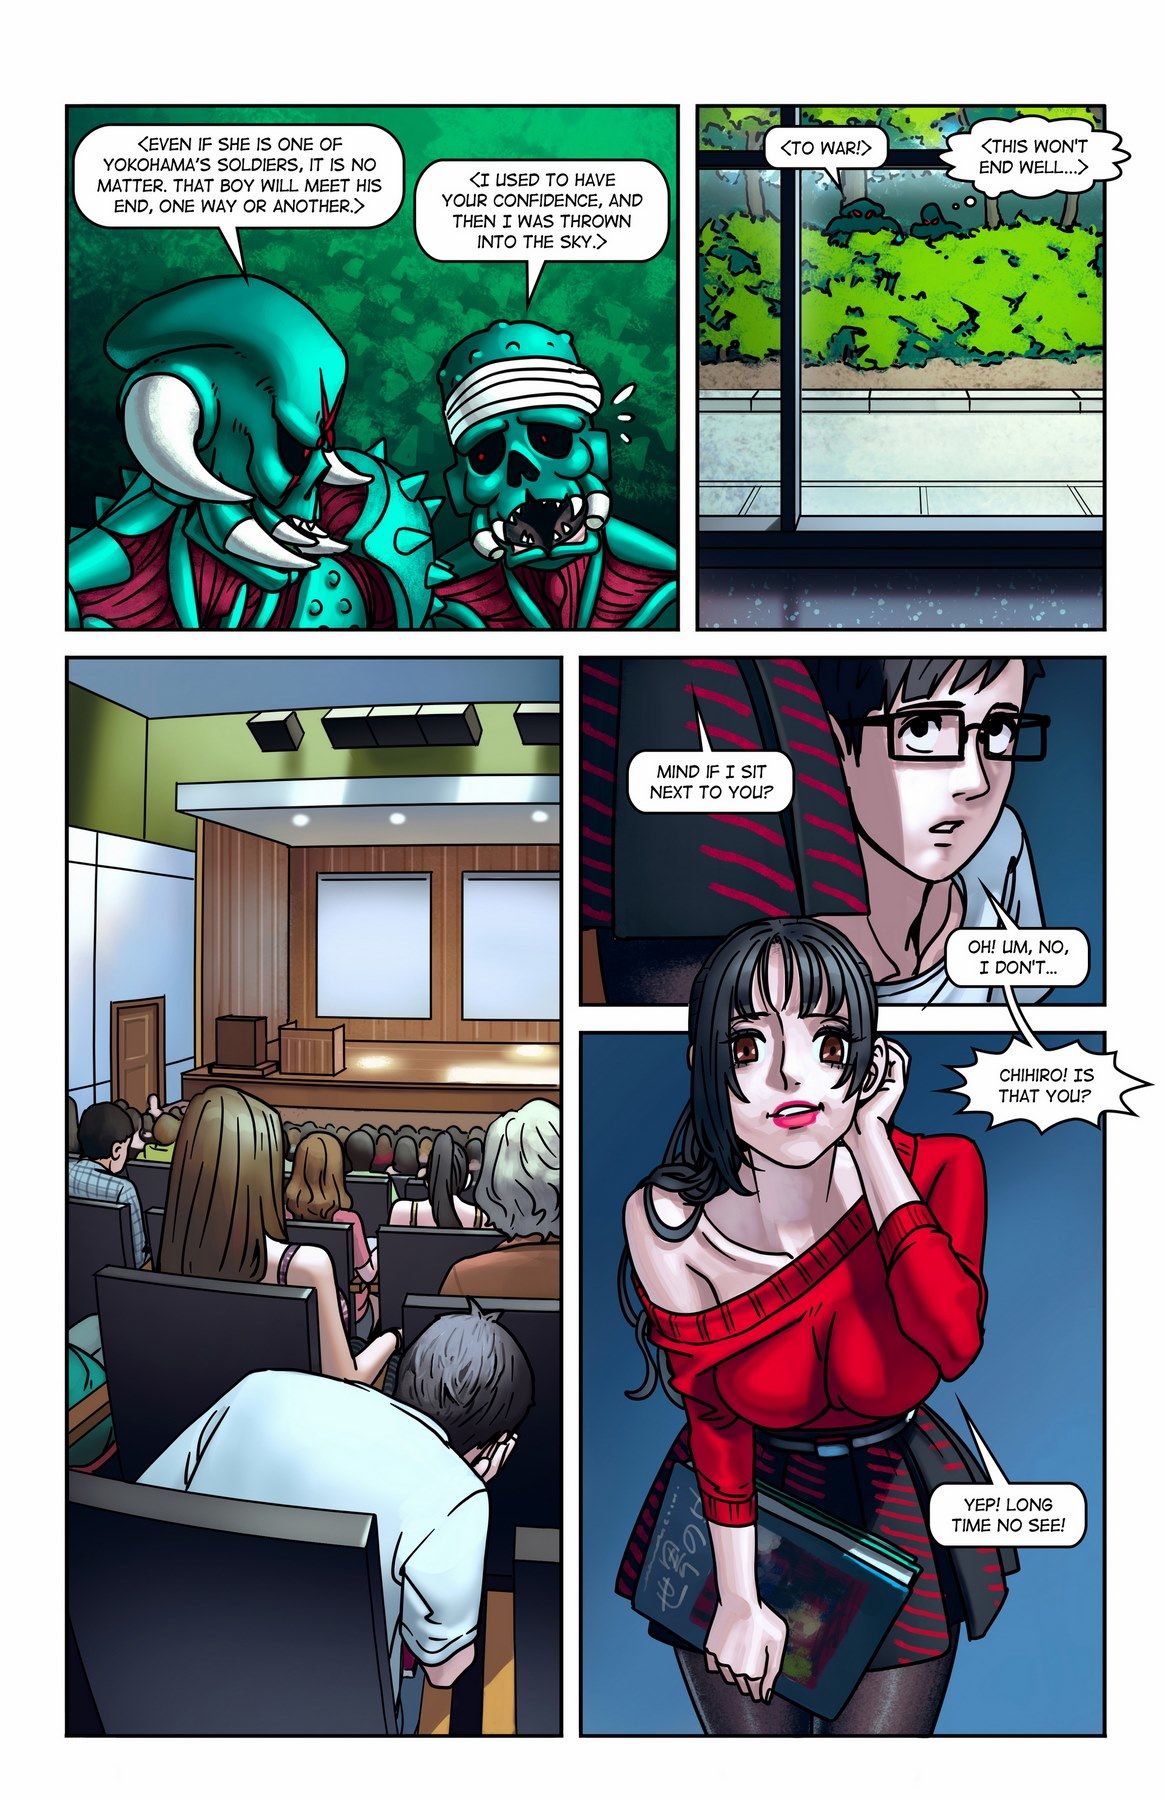 Maid of Honor Issue 02 MuscleFan page 6.